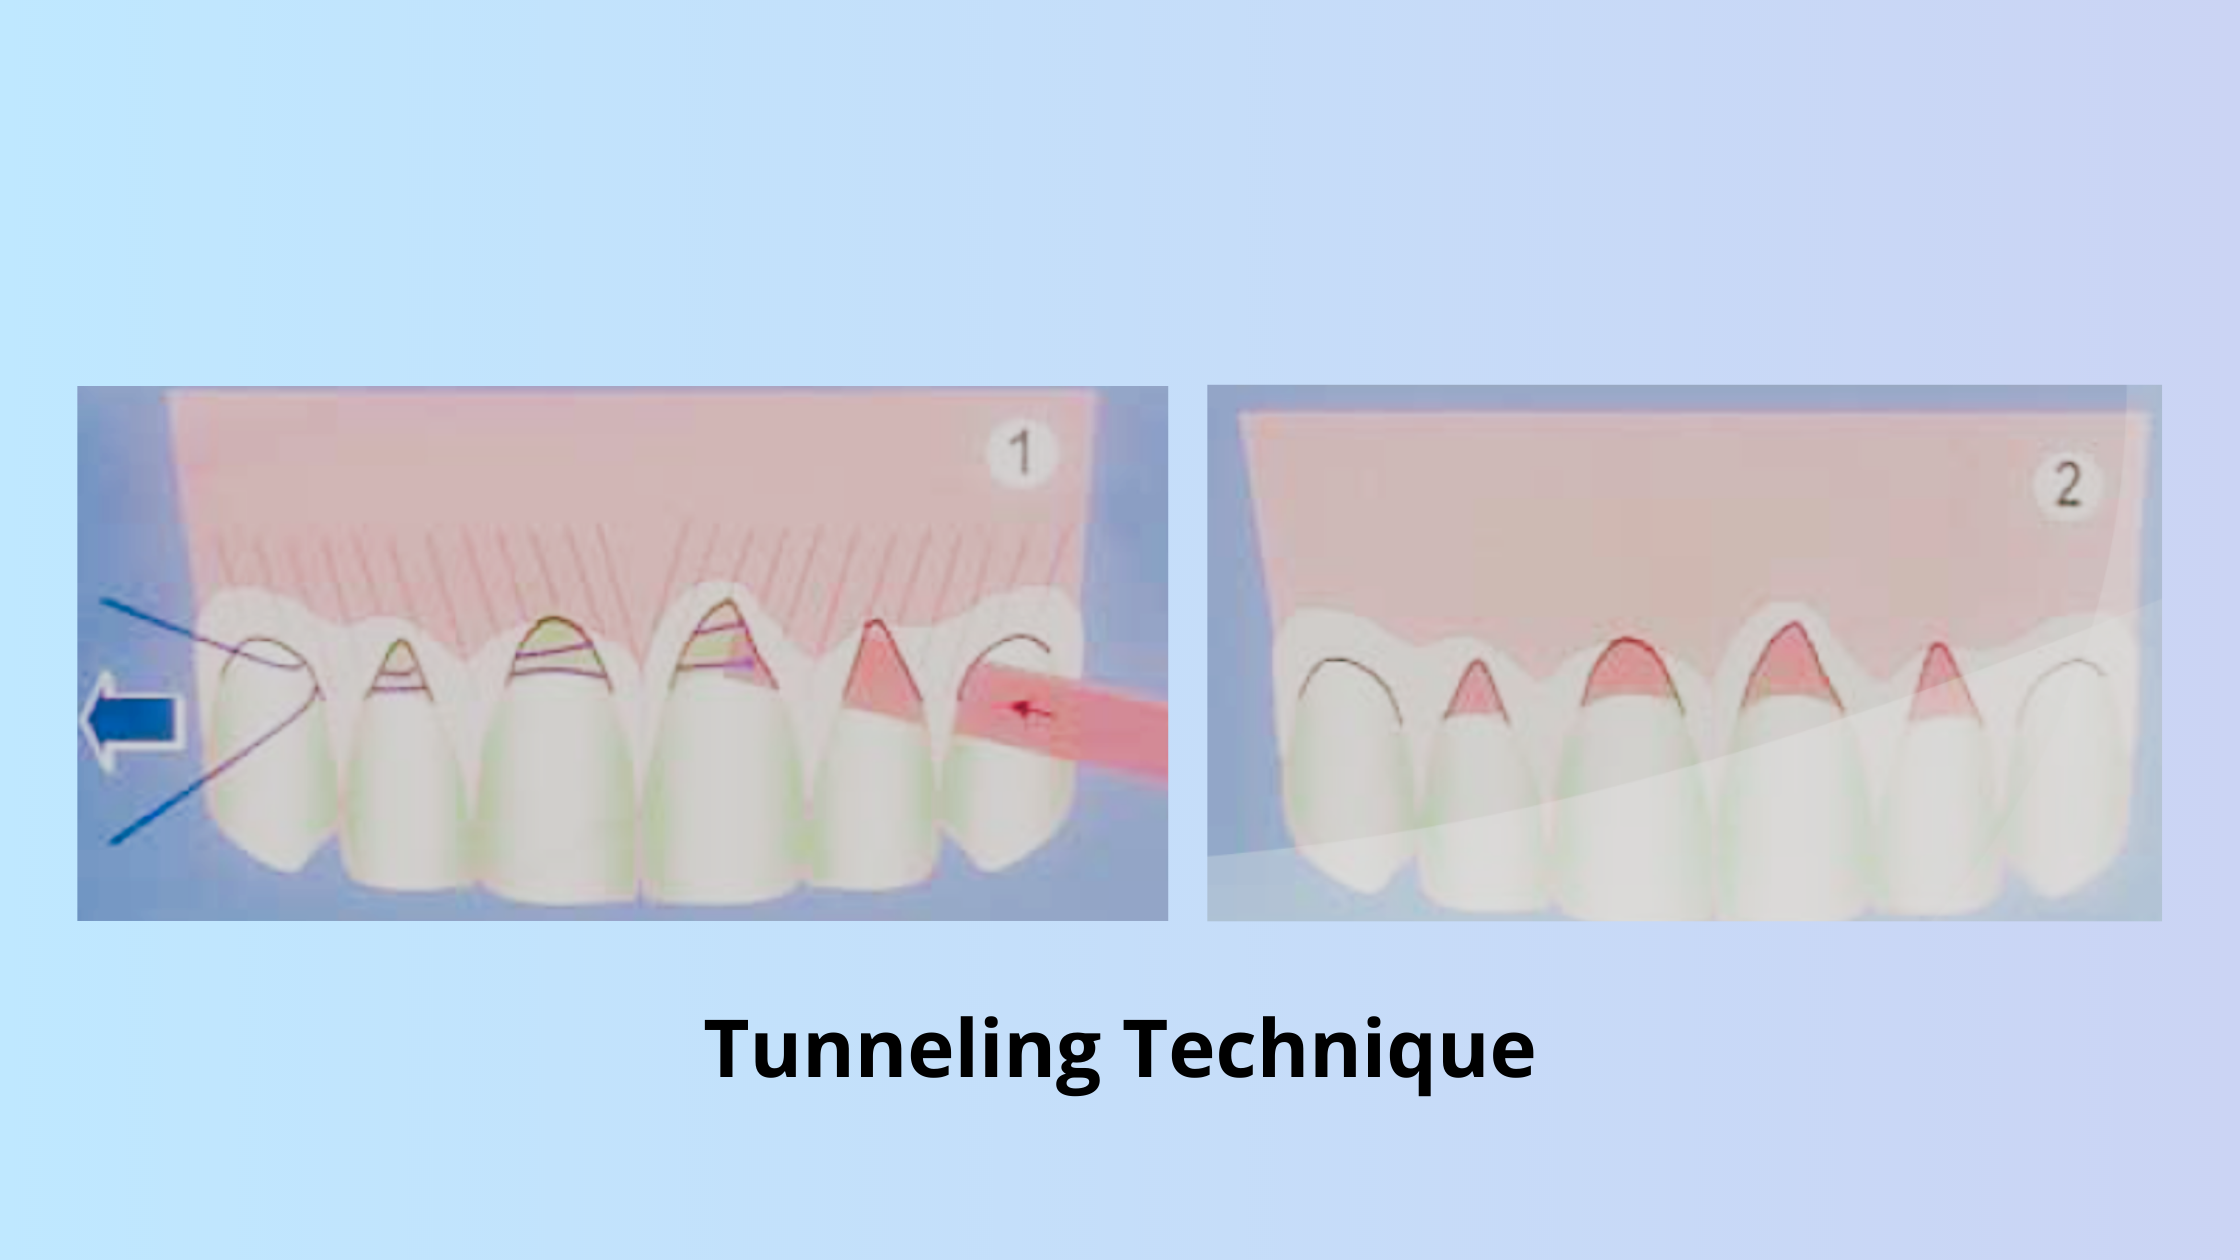 Connective tissue graft with tunneling technique